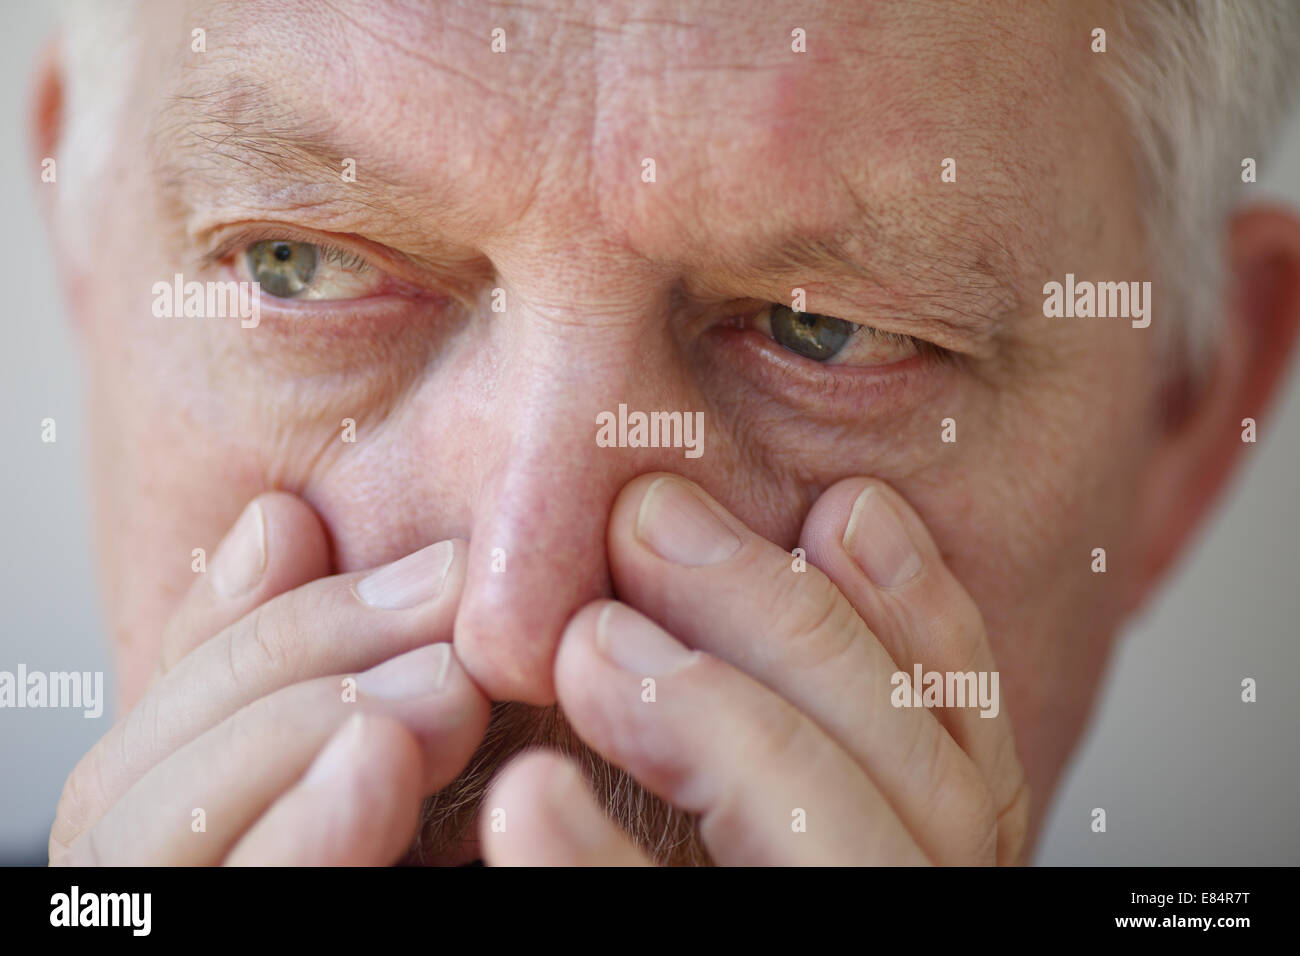 A man suffers from a stuffy nose. Stock Photo